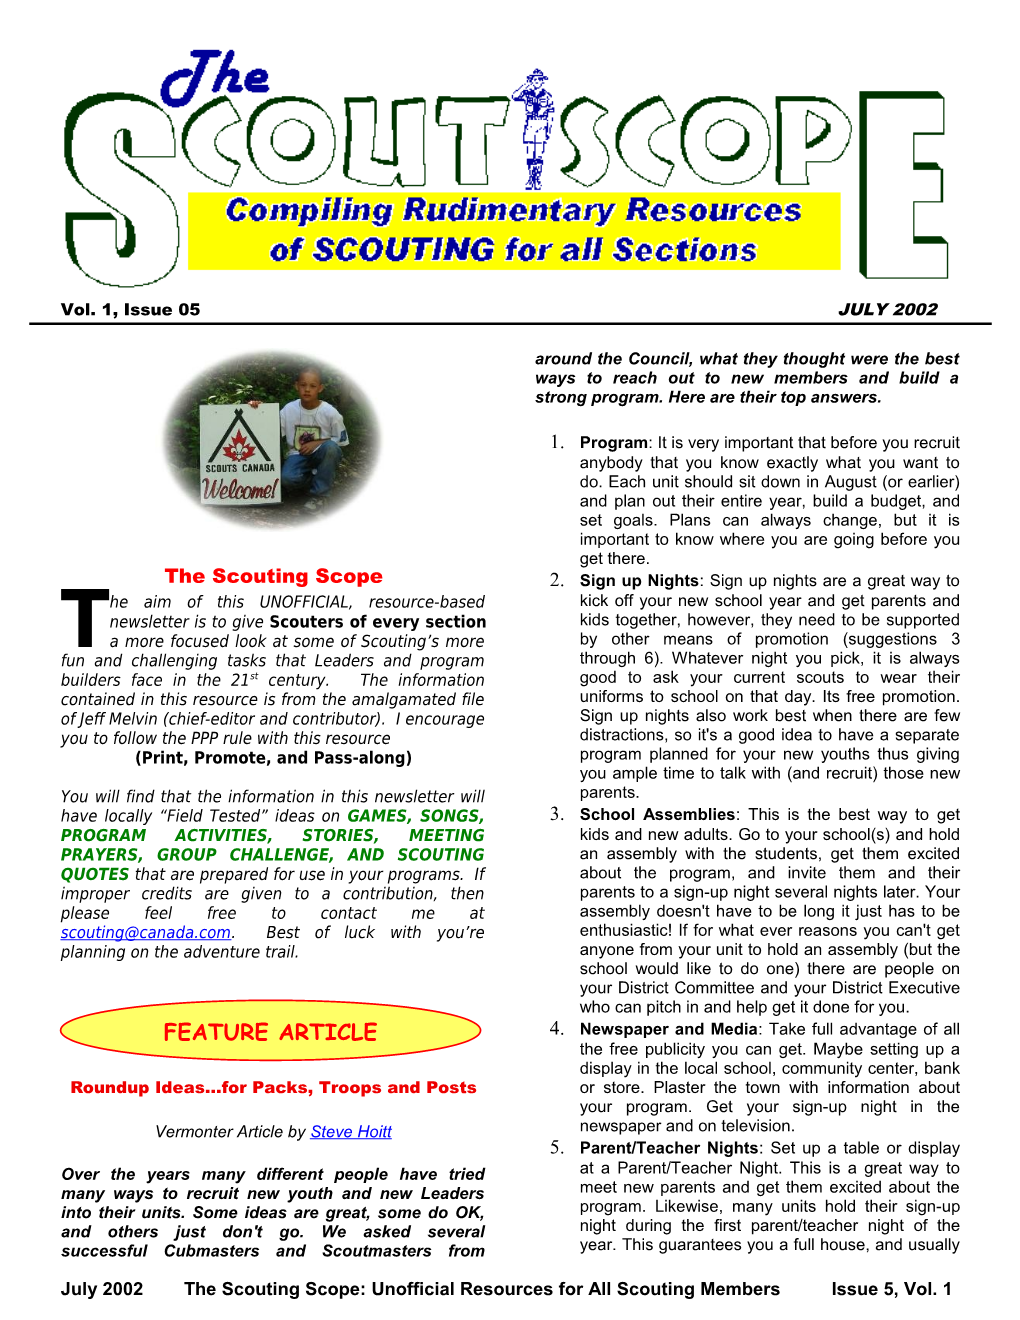 July 2002 the Scouting Scope: Unofficial Resources for All Scouting Members Issue 5, Vol. 1